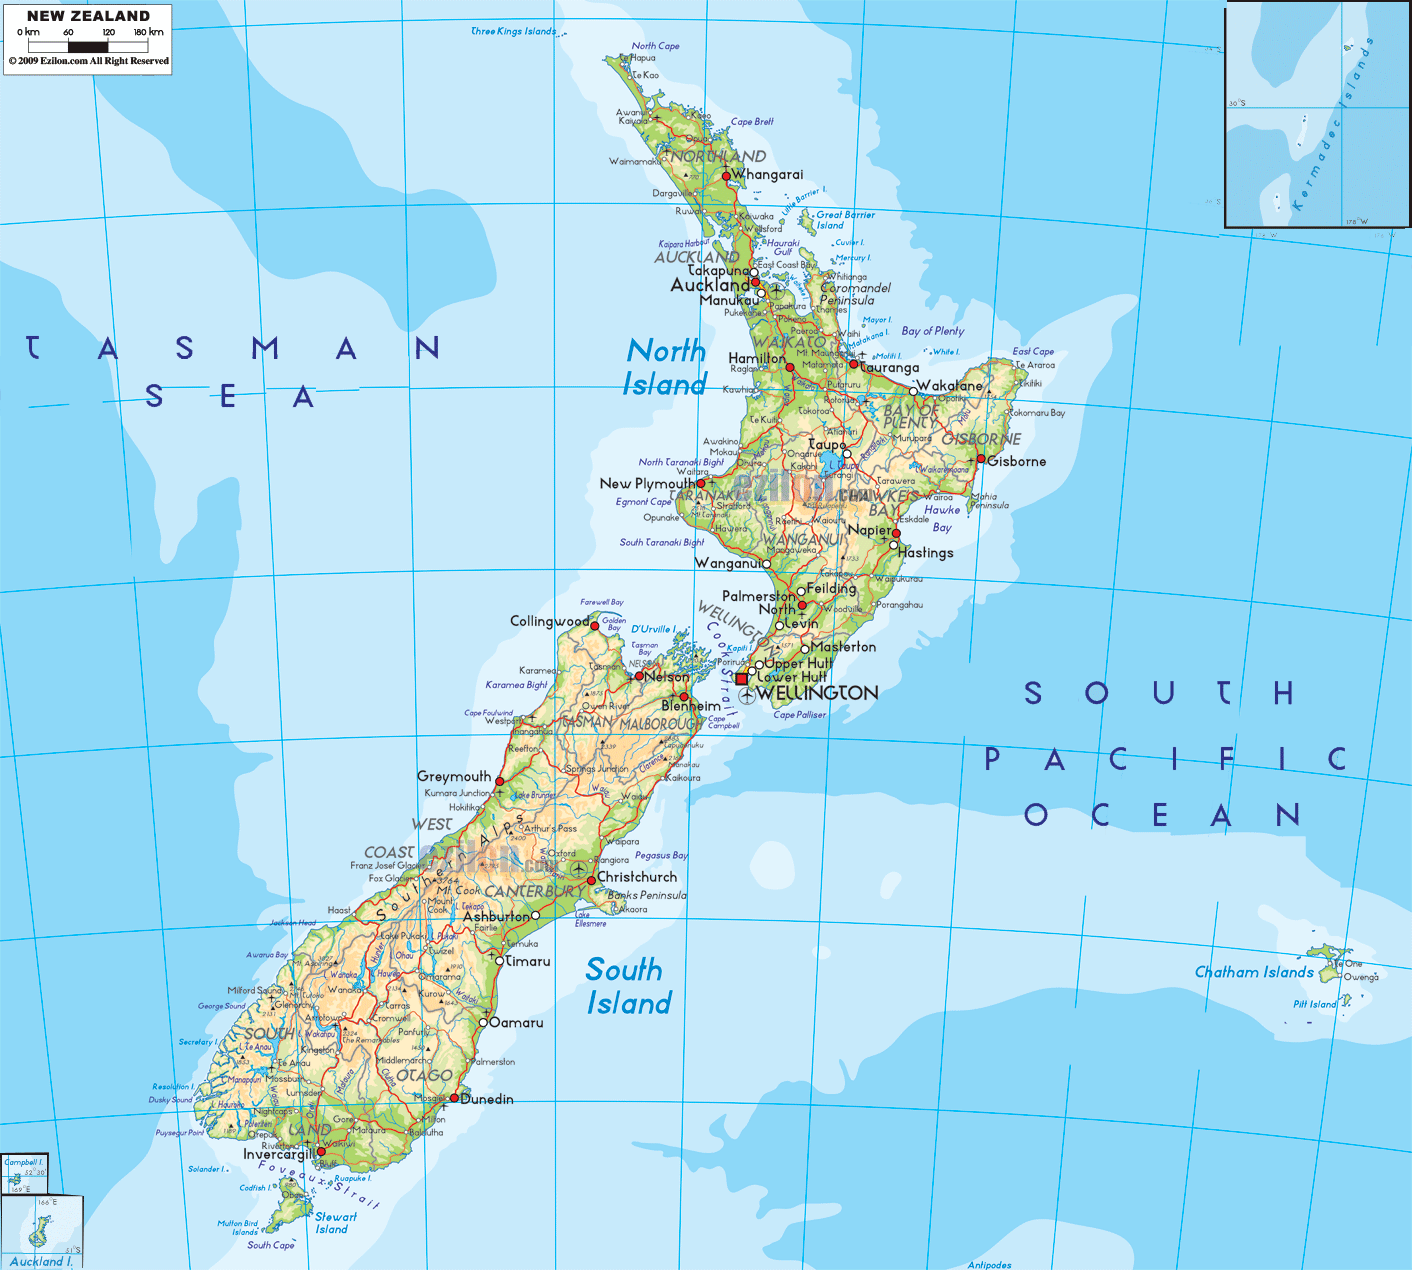 australia and new zealand physical map 1 1 Australia And New Zealand Physical Map